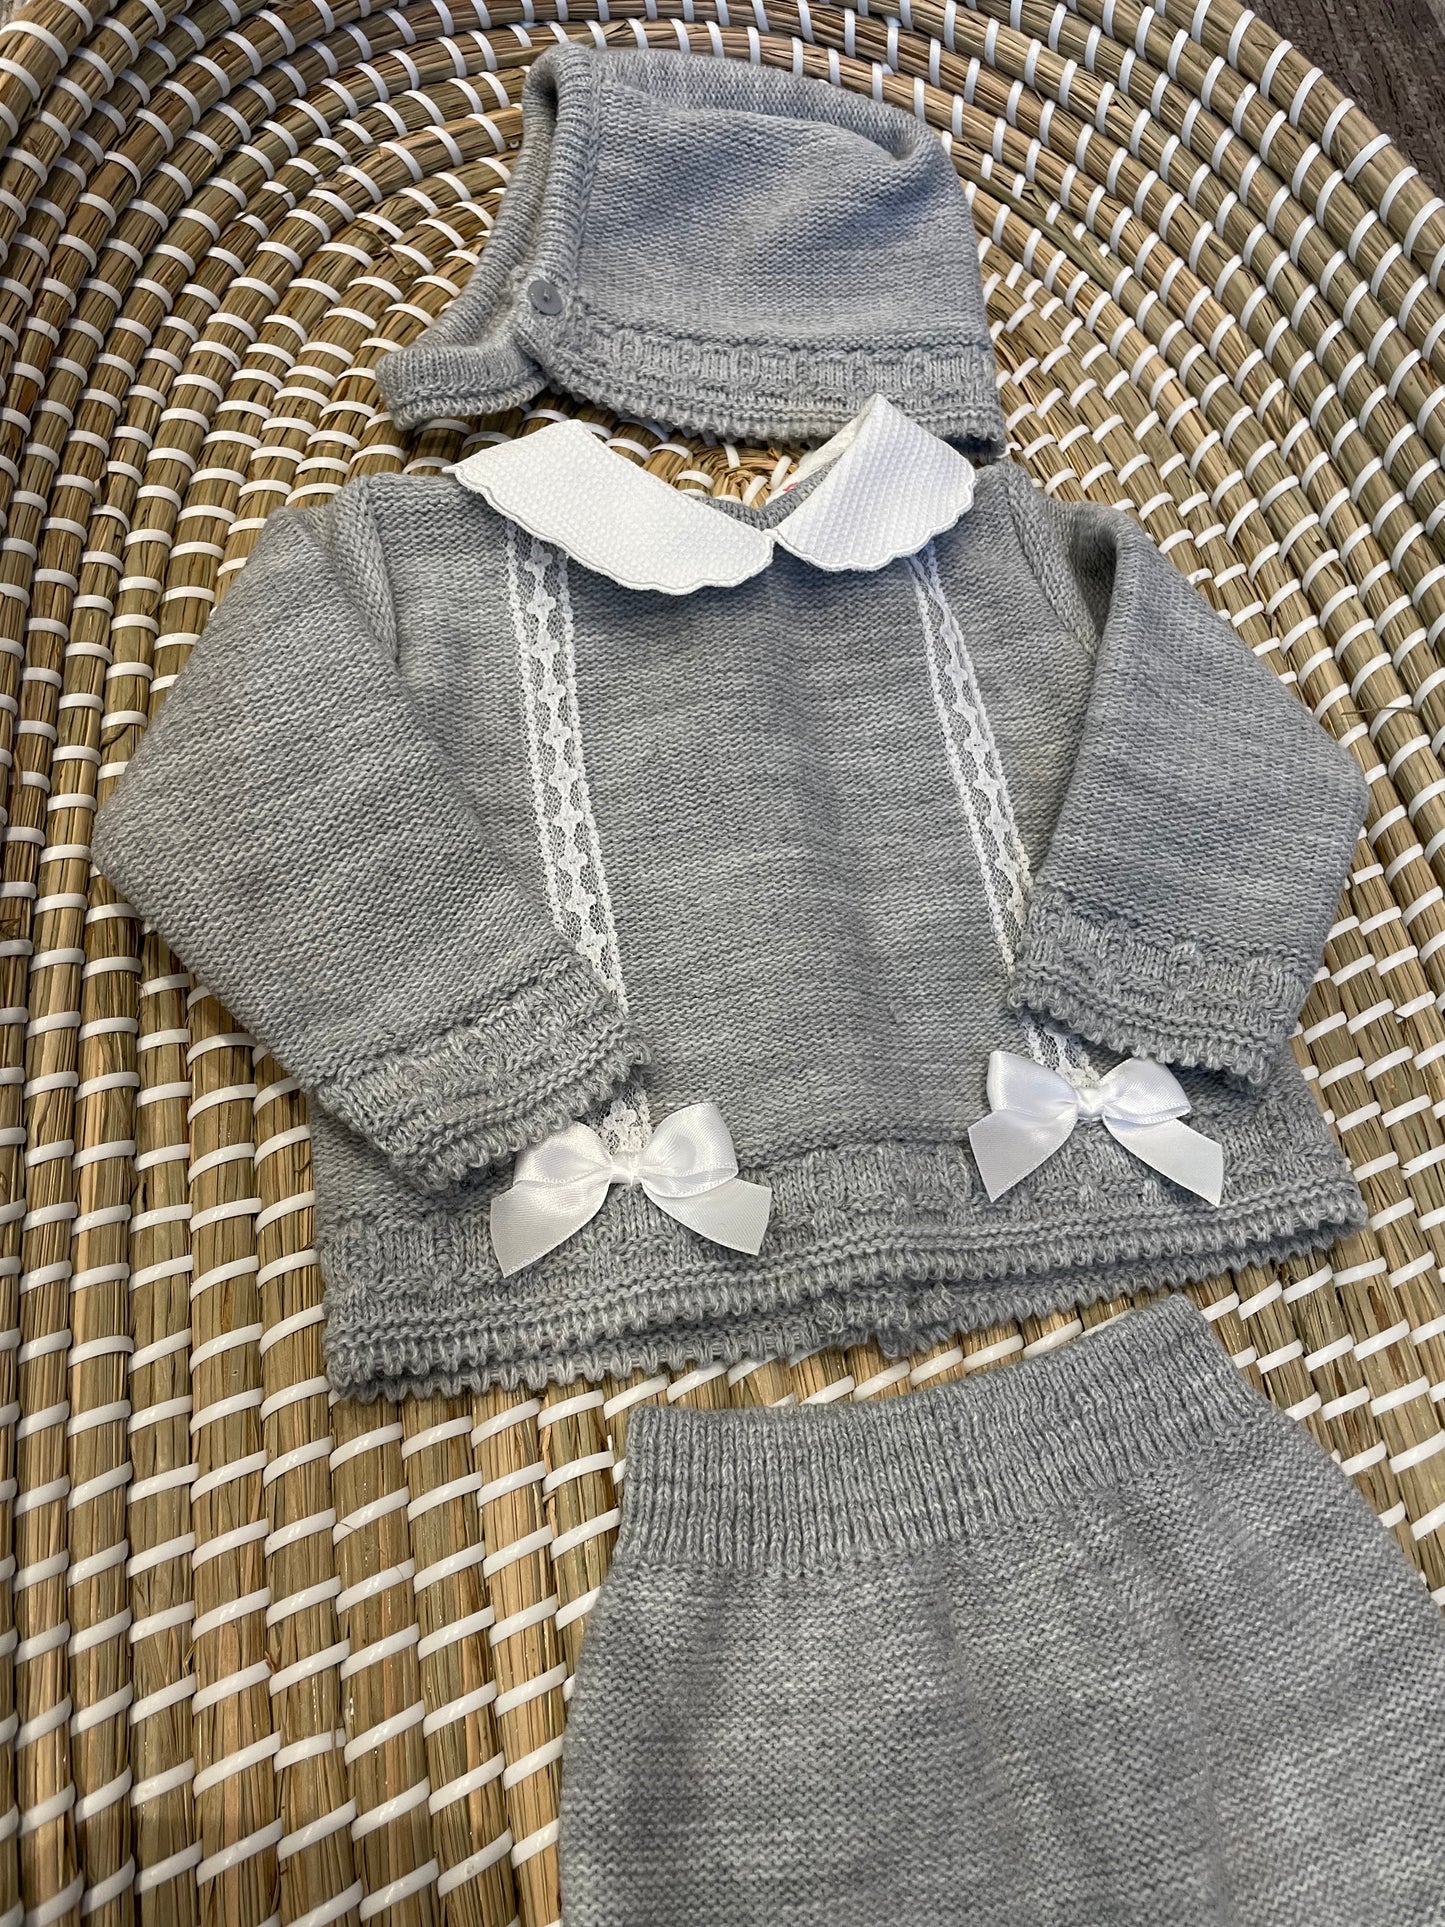 The new born knitted set - grey with white bows